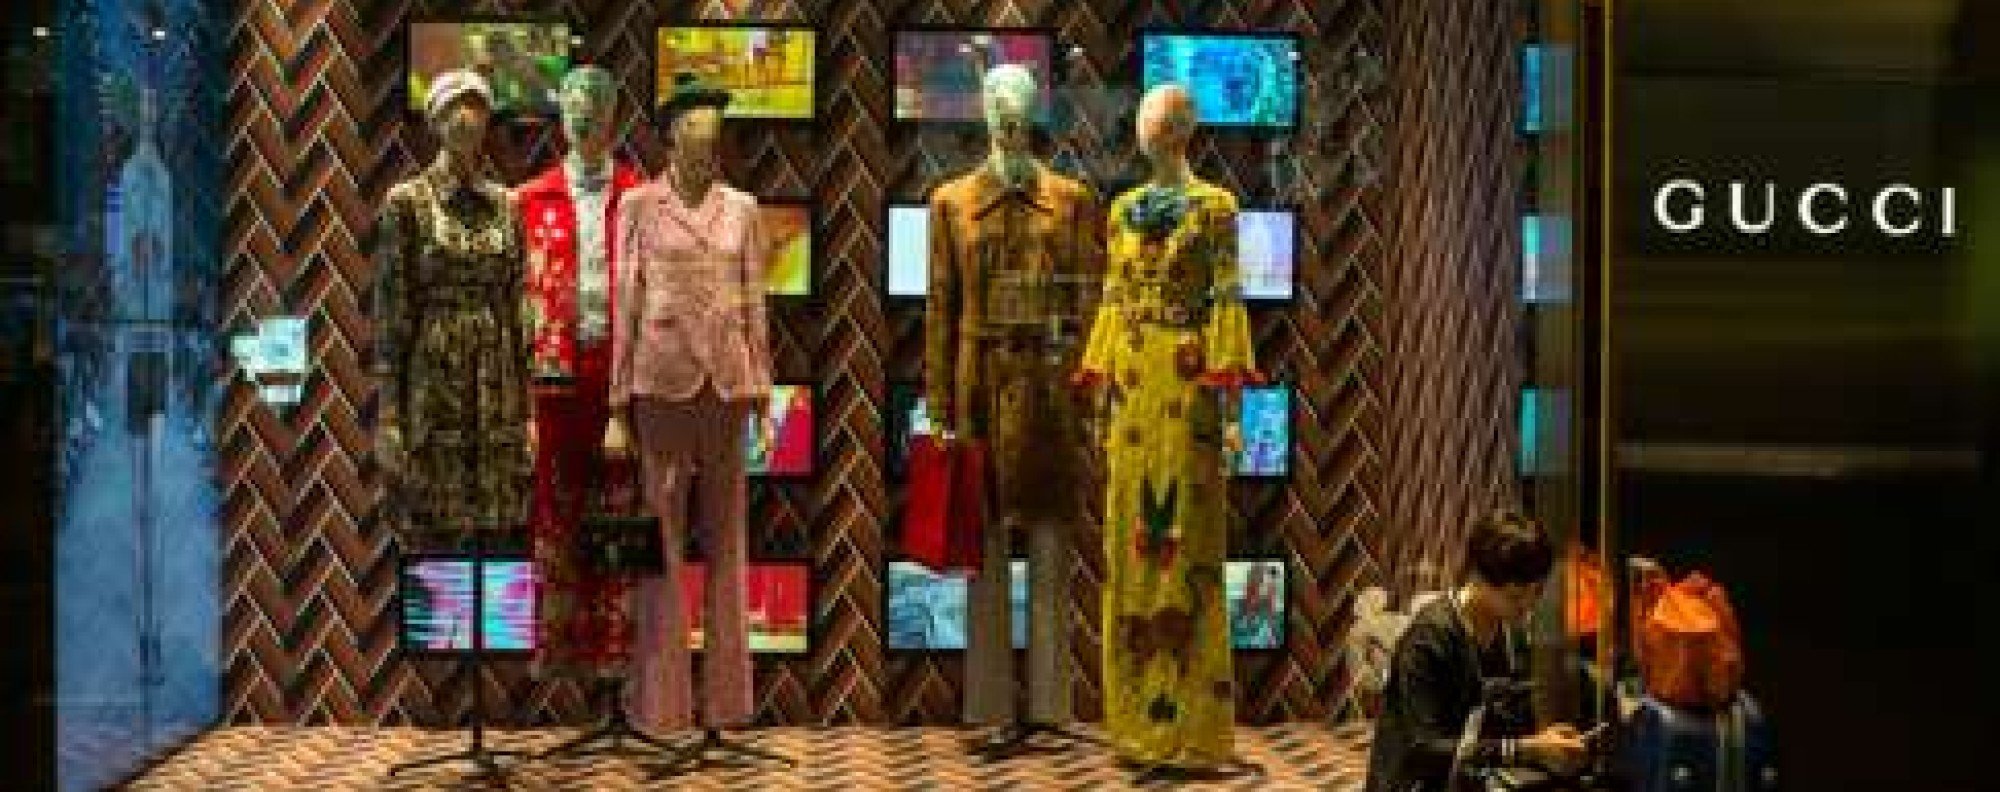 Gucci  Visual Merchandising in Luxury & Fashion Industry